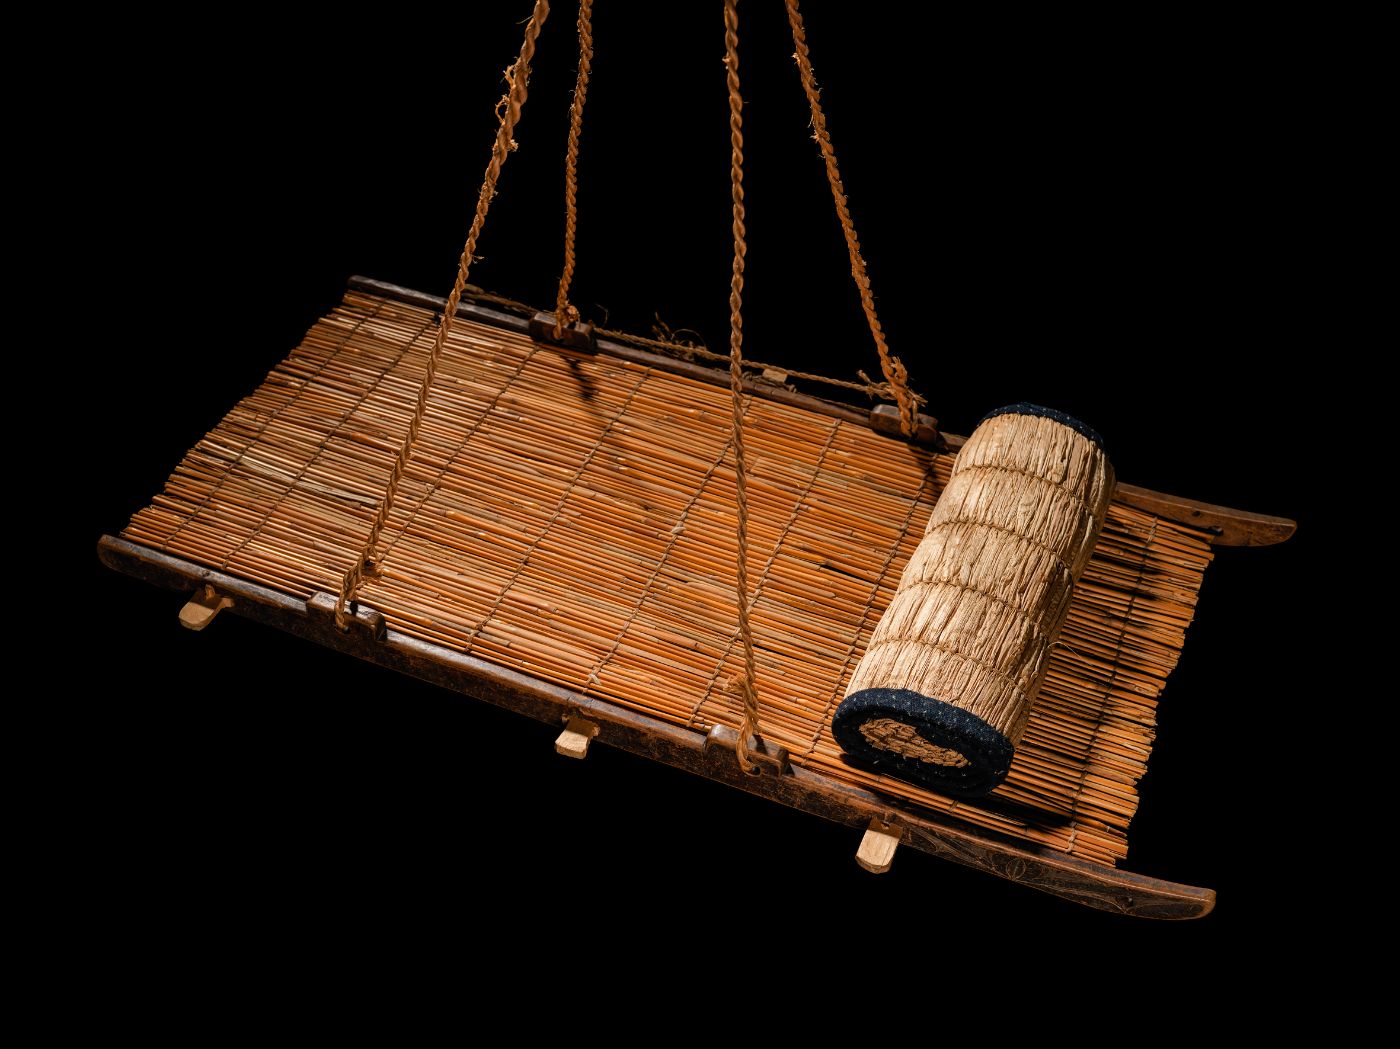 Bamboo and wood have been joined together to form a kind of board that hangs from four ropes; a mat is rolled up on top.